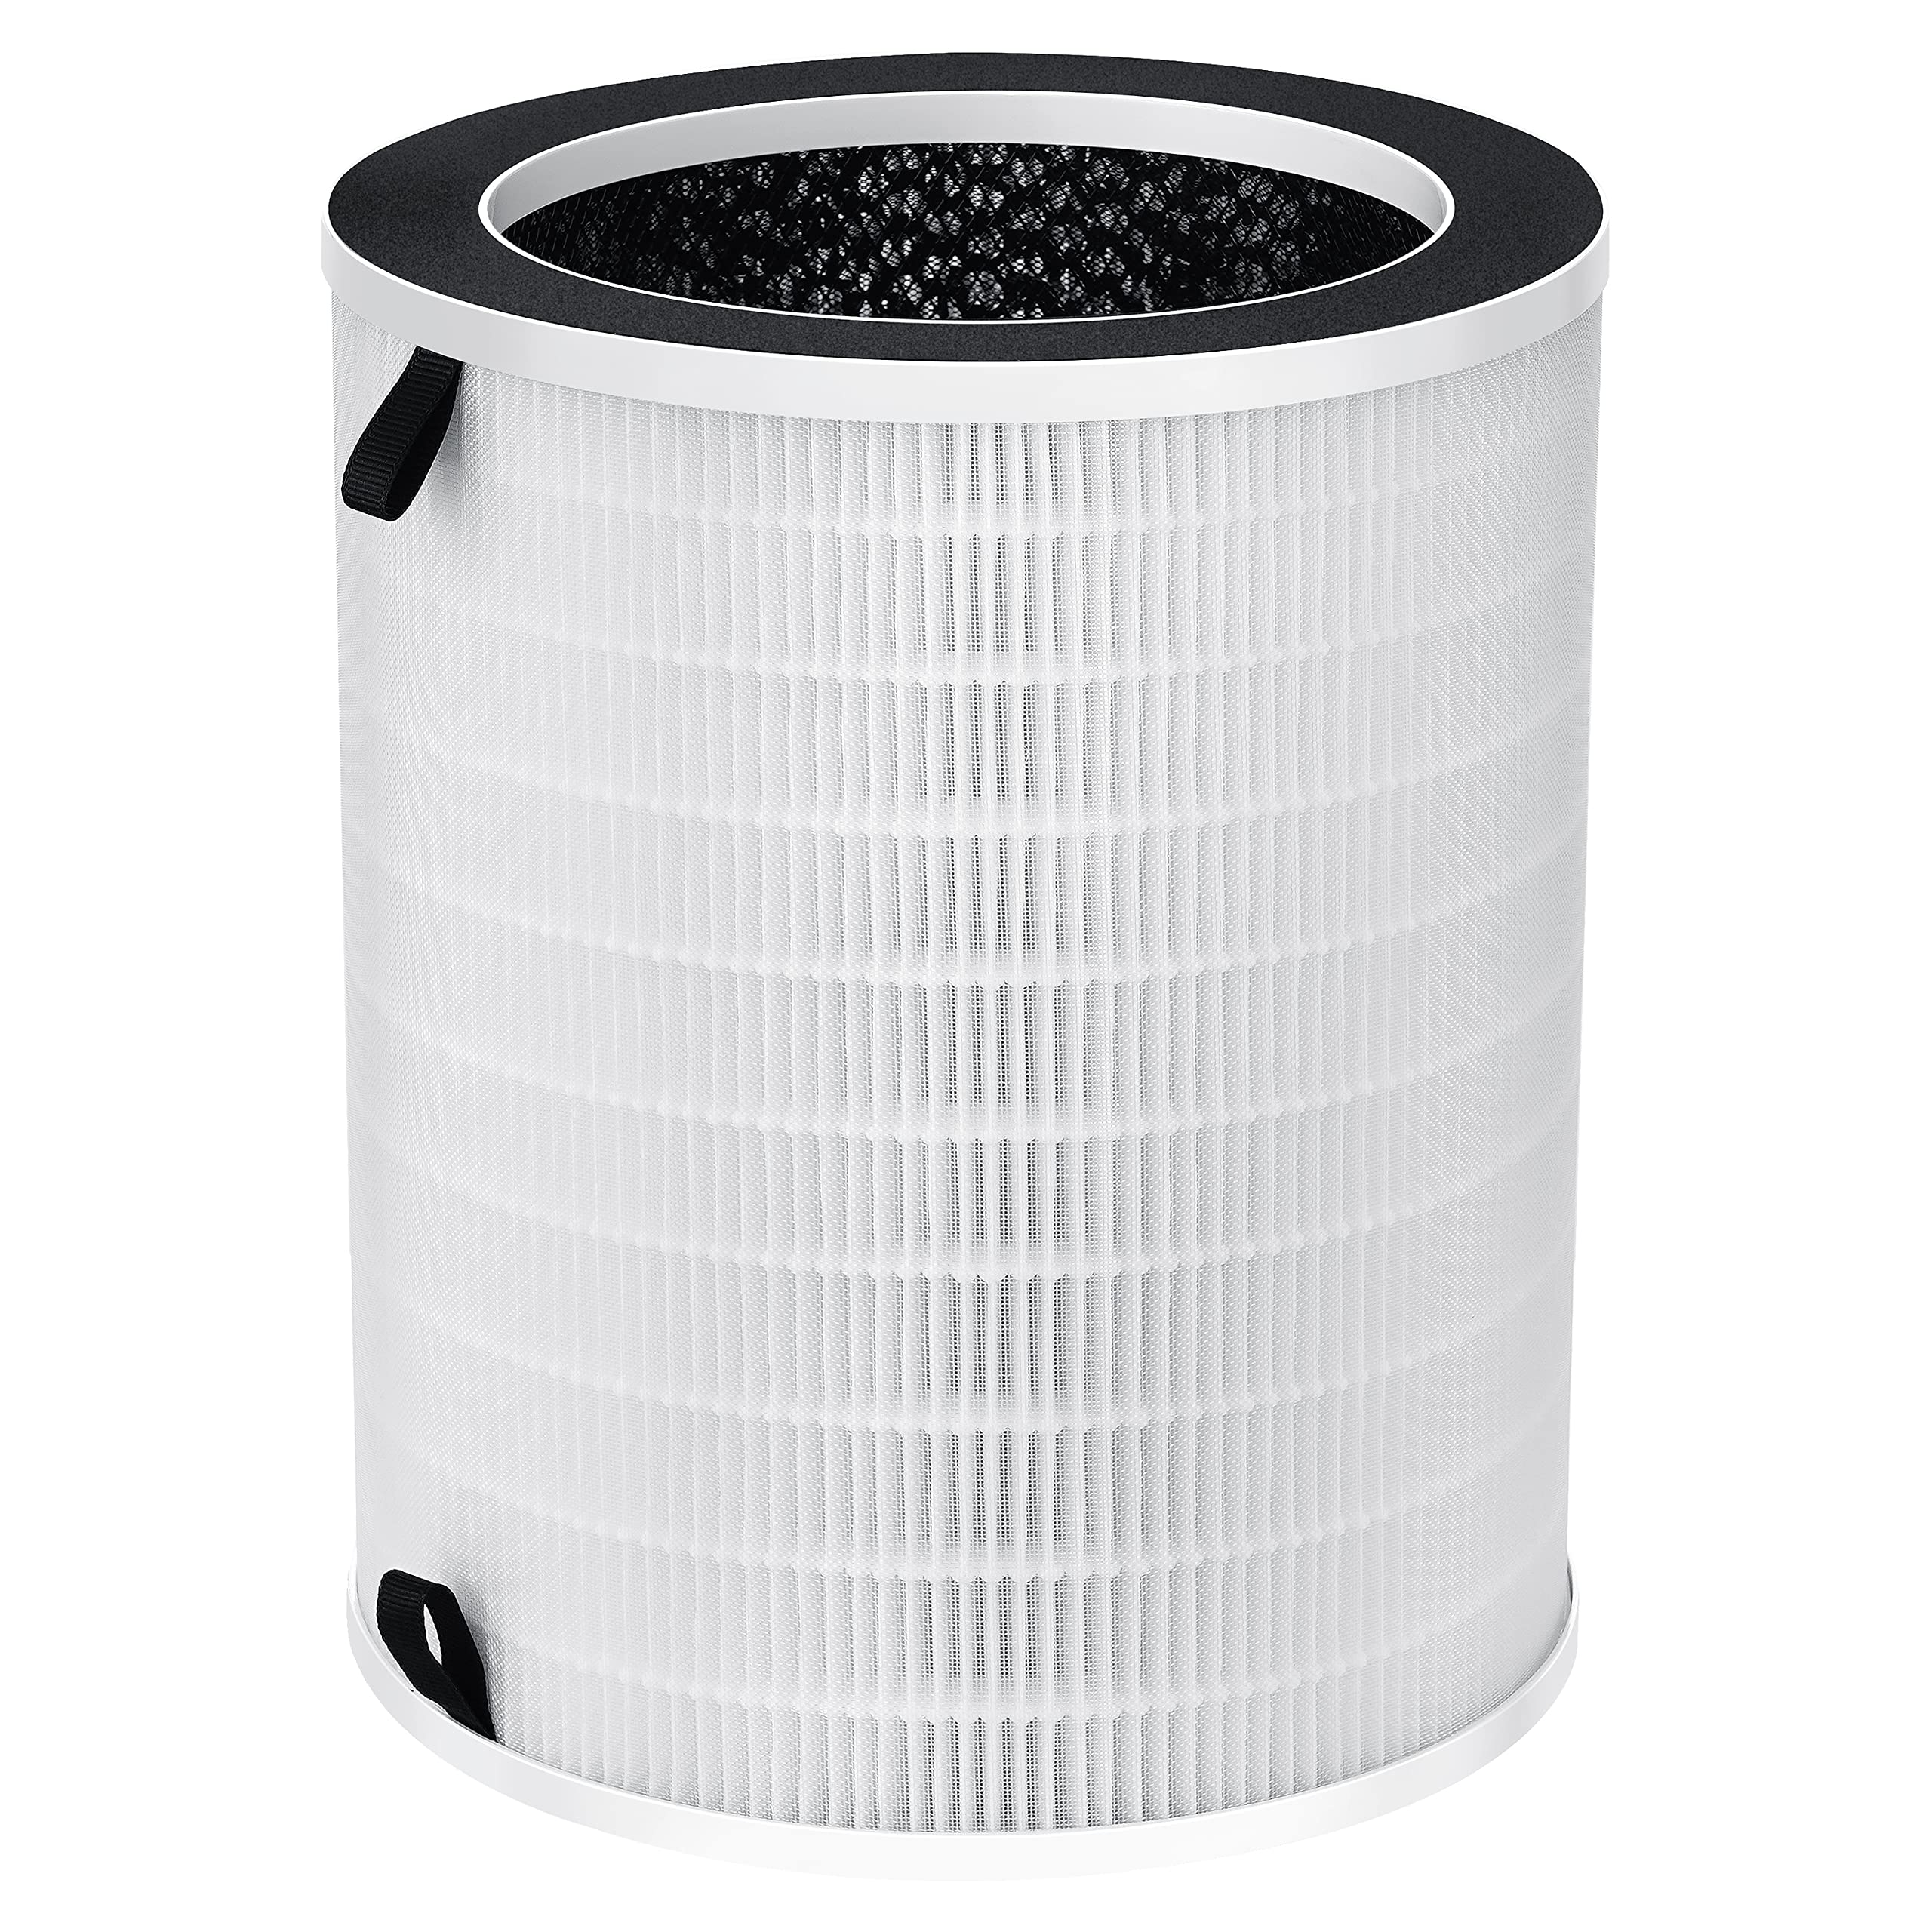 Galanz Pro Air Purifier Replacement Filter, H13 HEPA with High Grade Granular Activated Carbon Filter, 3-Stage Filtration for Dust, Pet Odors, Pollen, Smoke, Pollution, White